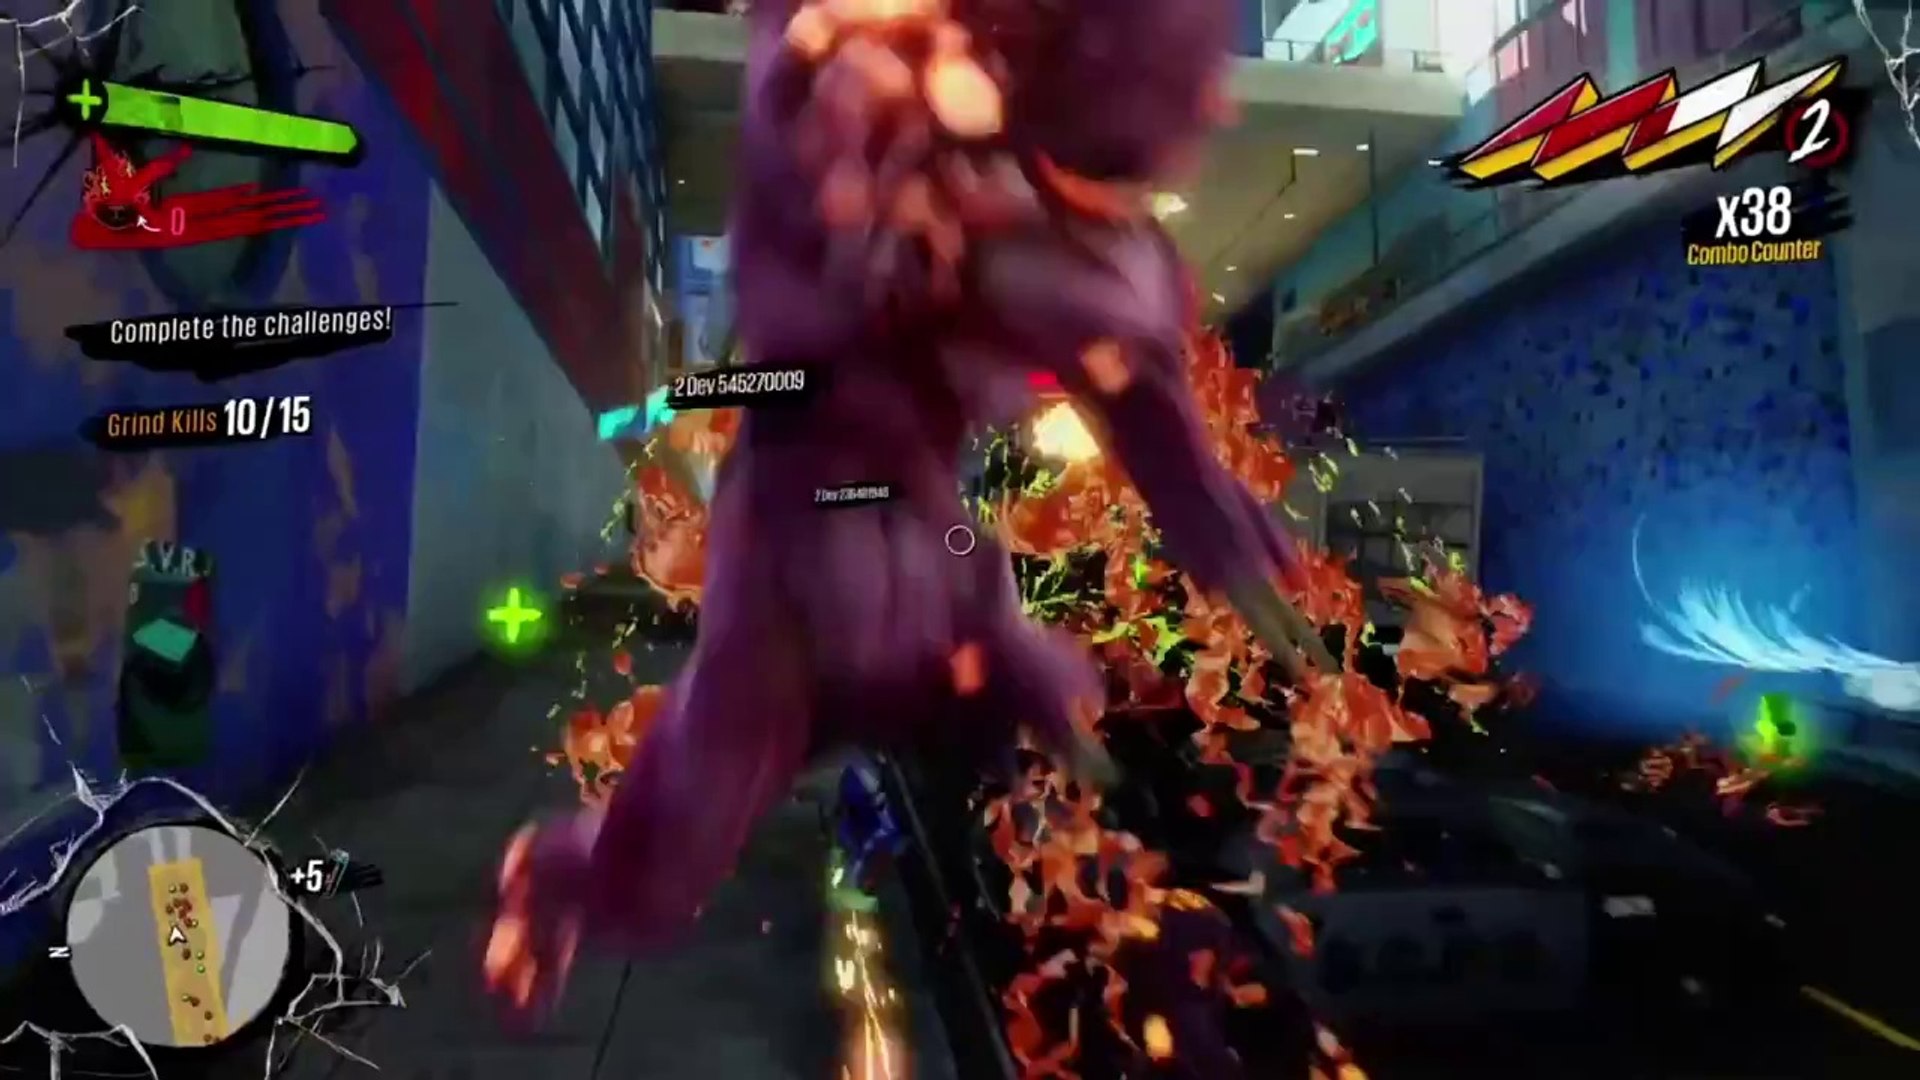 Sunset Overdrive Gameplay Trailer: Awesome Rampage! - The Escapist